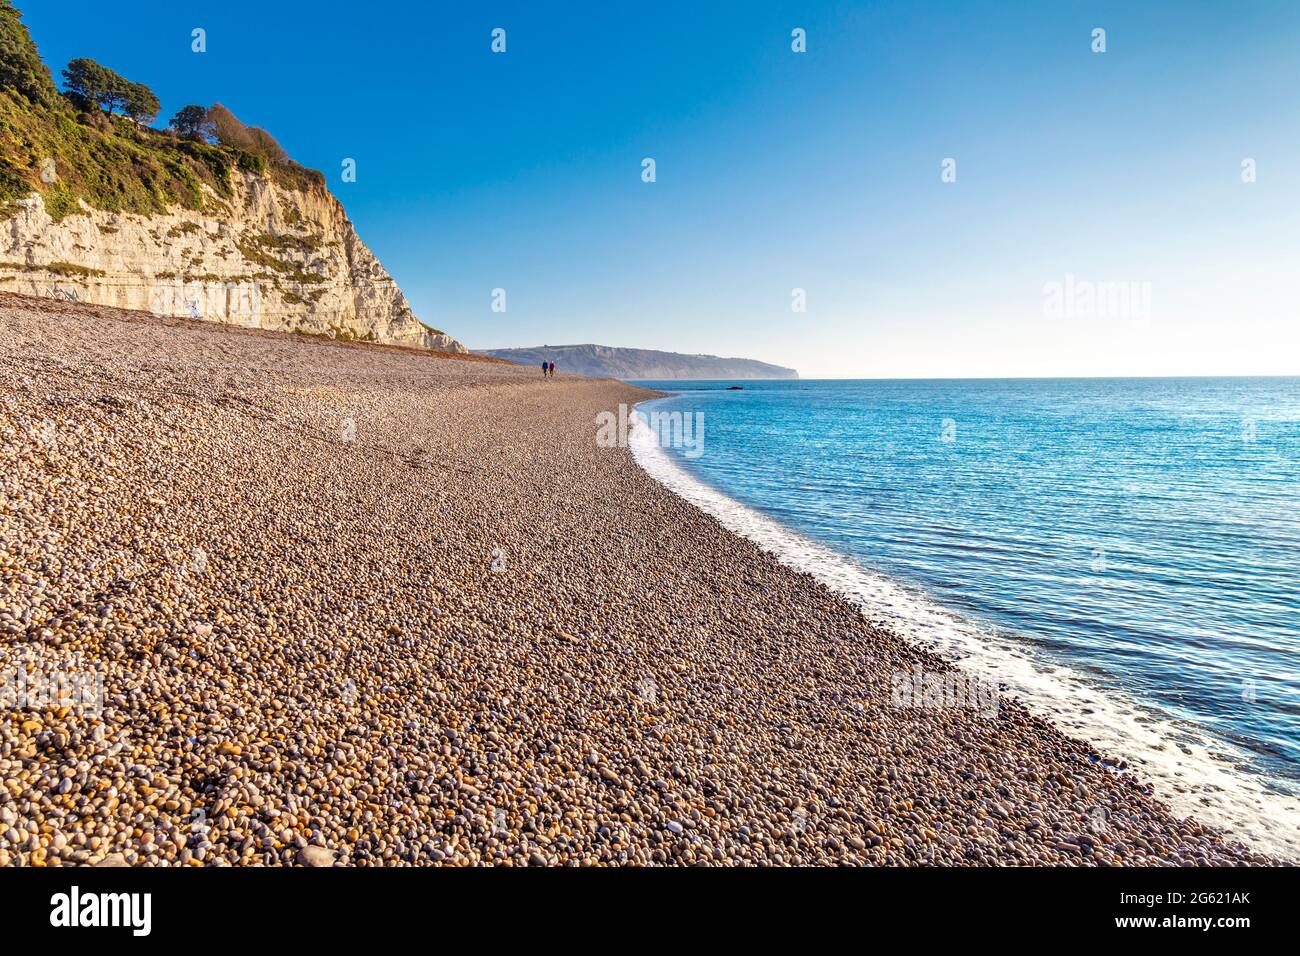 Shingle beach and sea at the seaside town of Beer, Beer Beach, Devon, UK Stock Photo